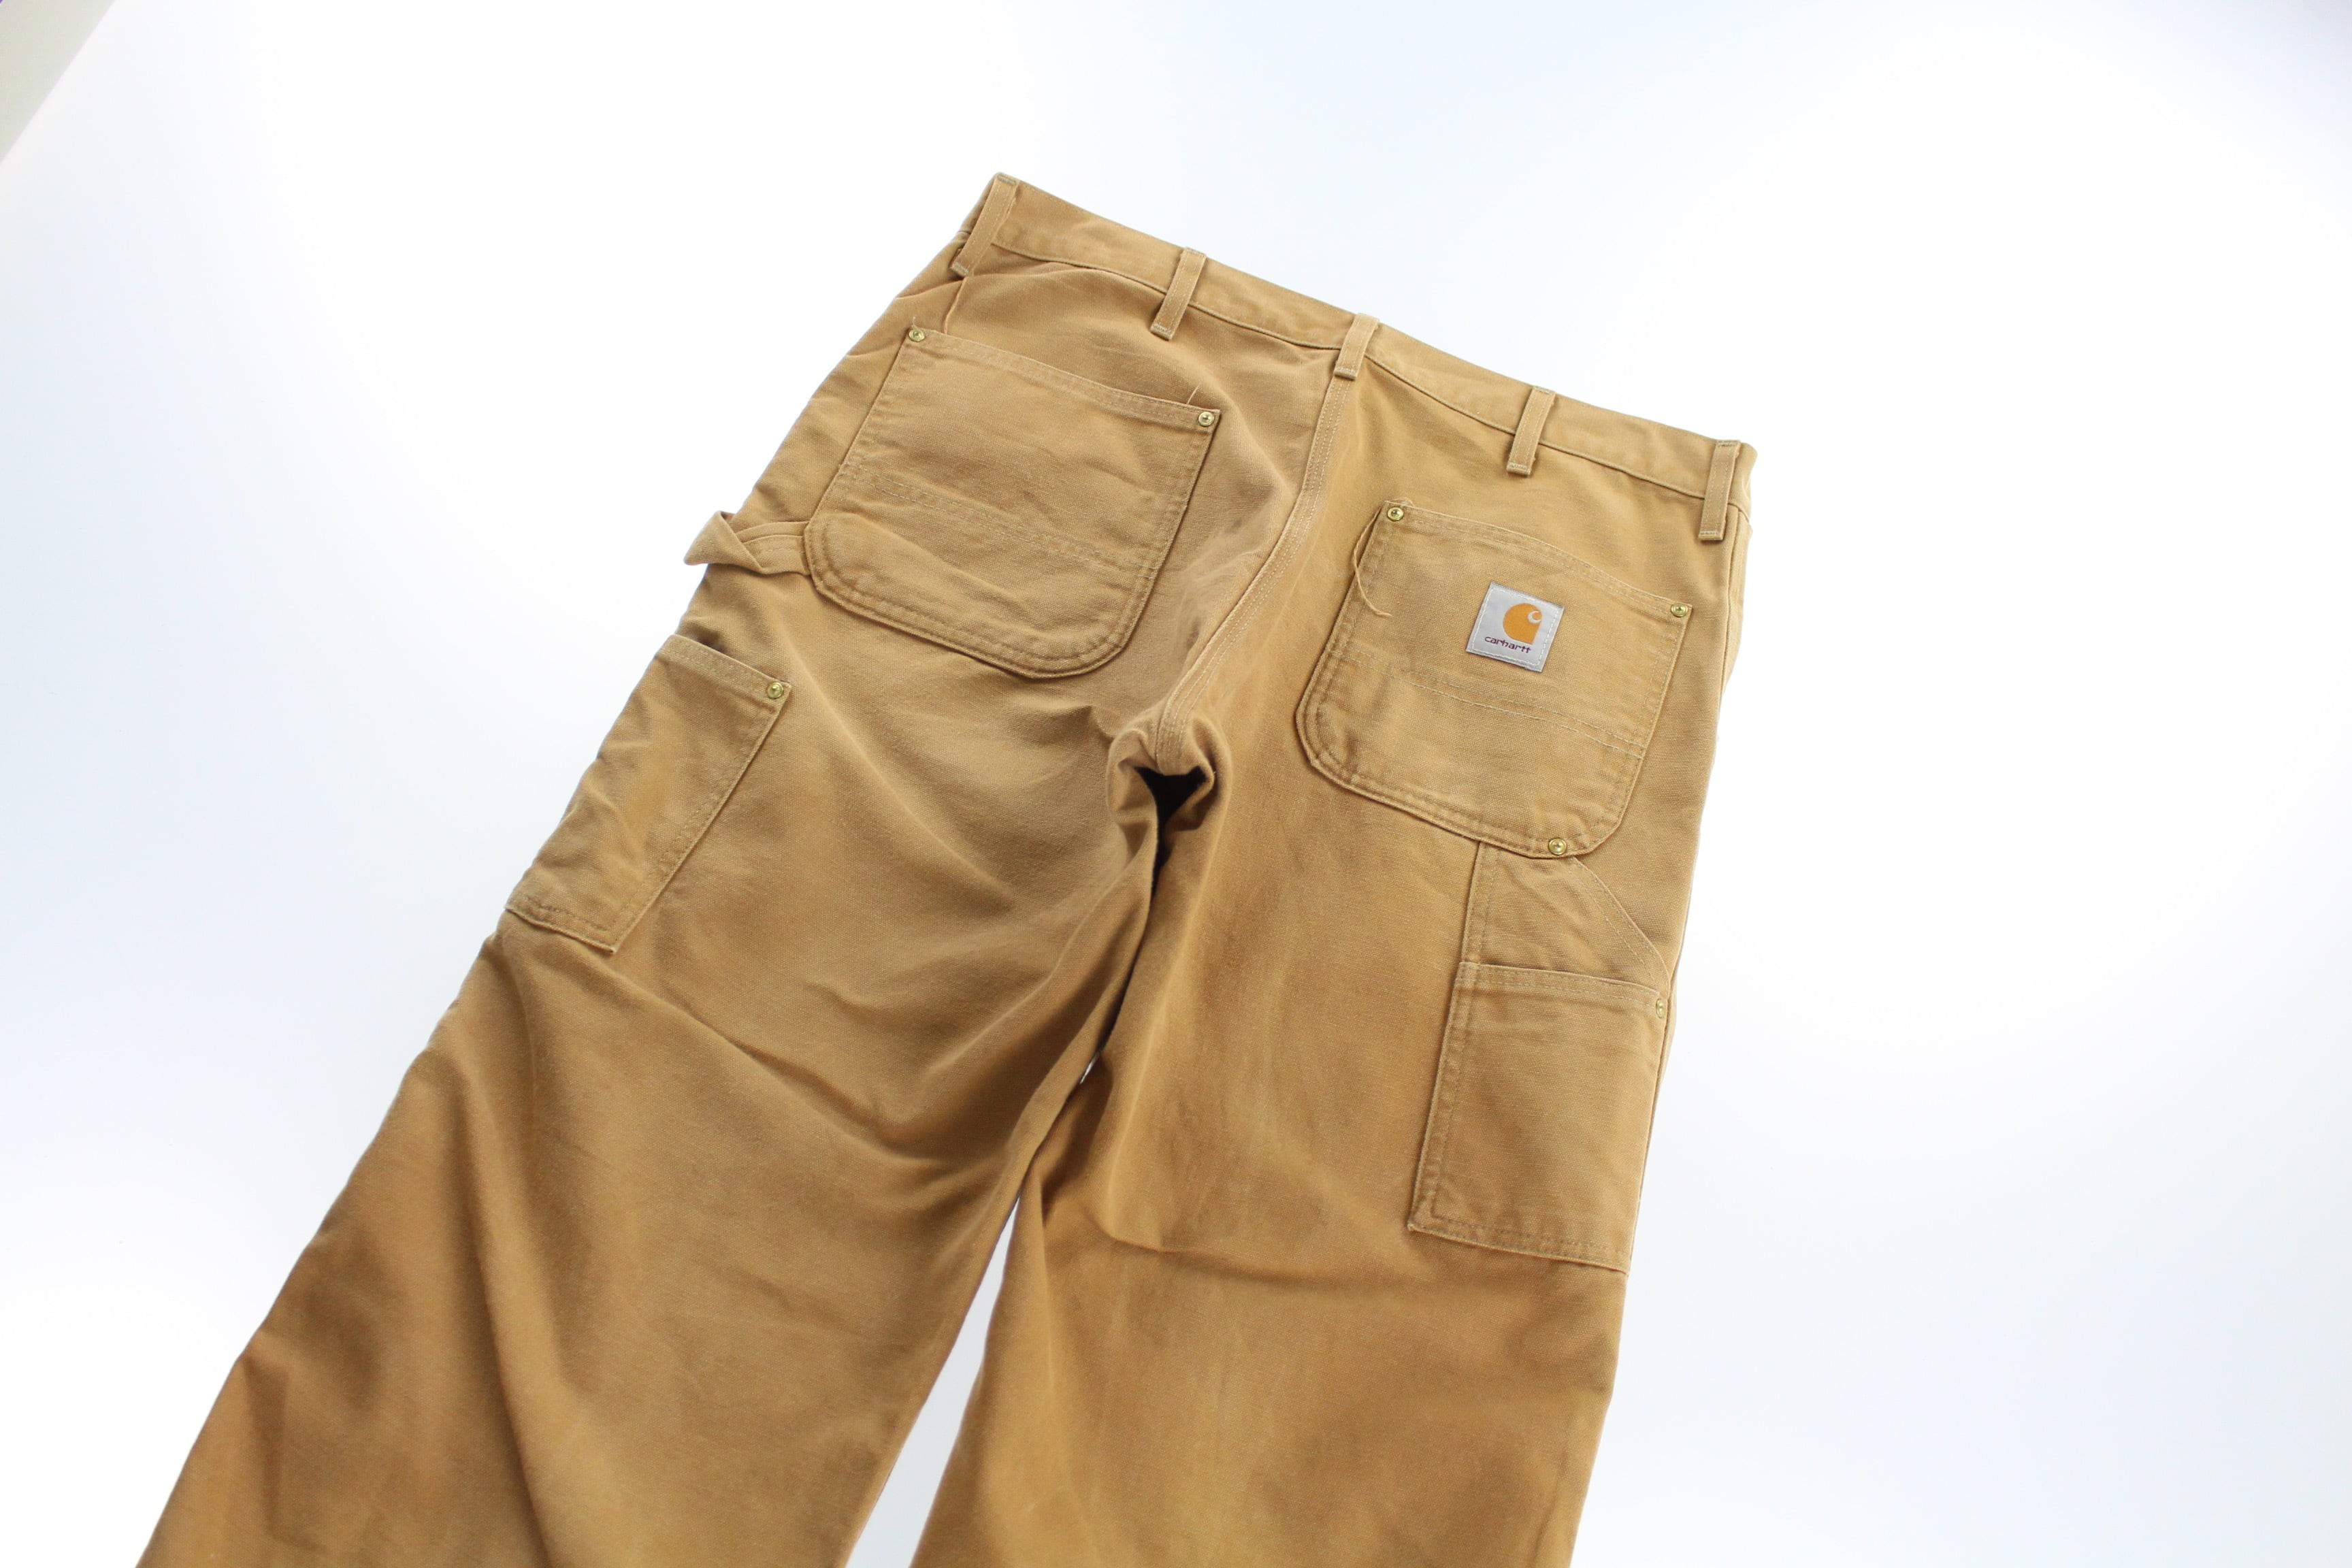 CUBA】1990s vintage Carhartt double knee duck painter pant made in ...